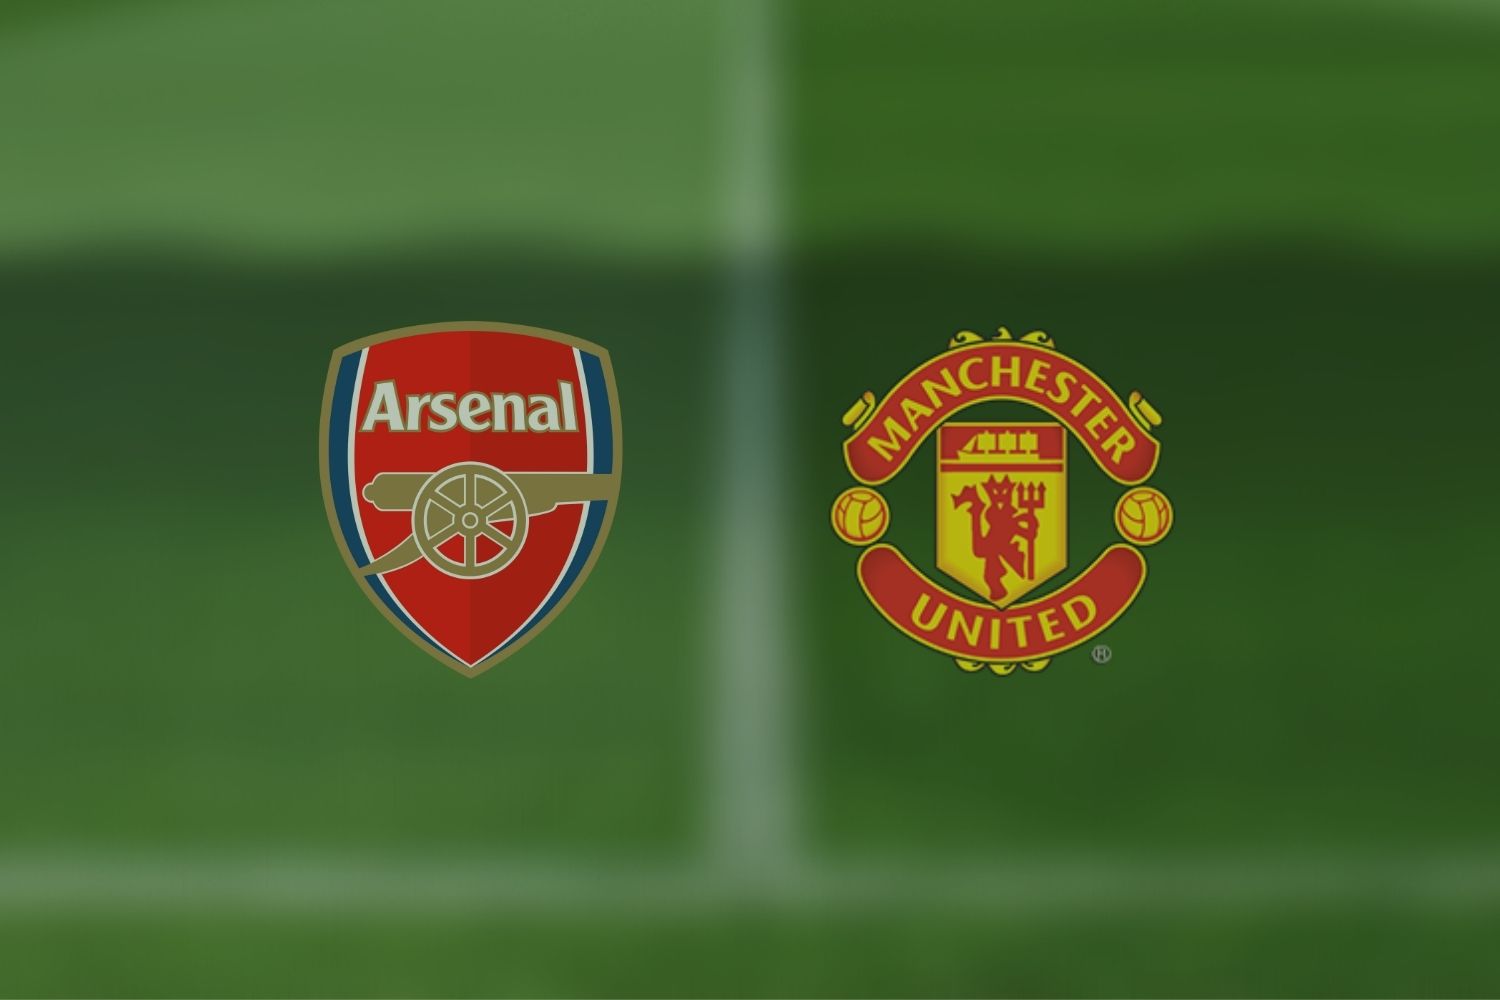 Arsenal FC vs Manchester United: English Premier League Match Preview and Betting Prediction